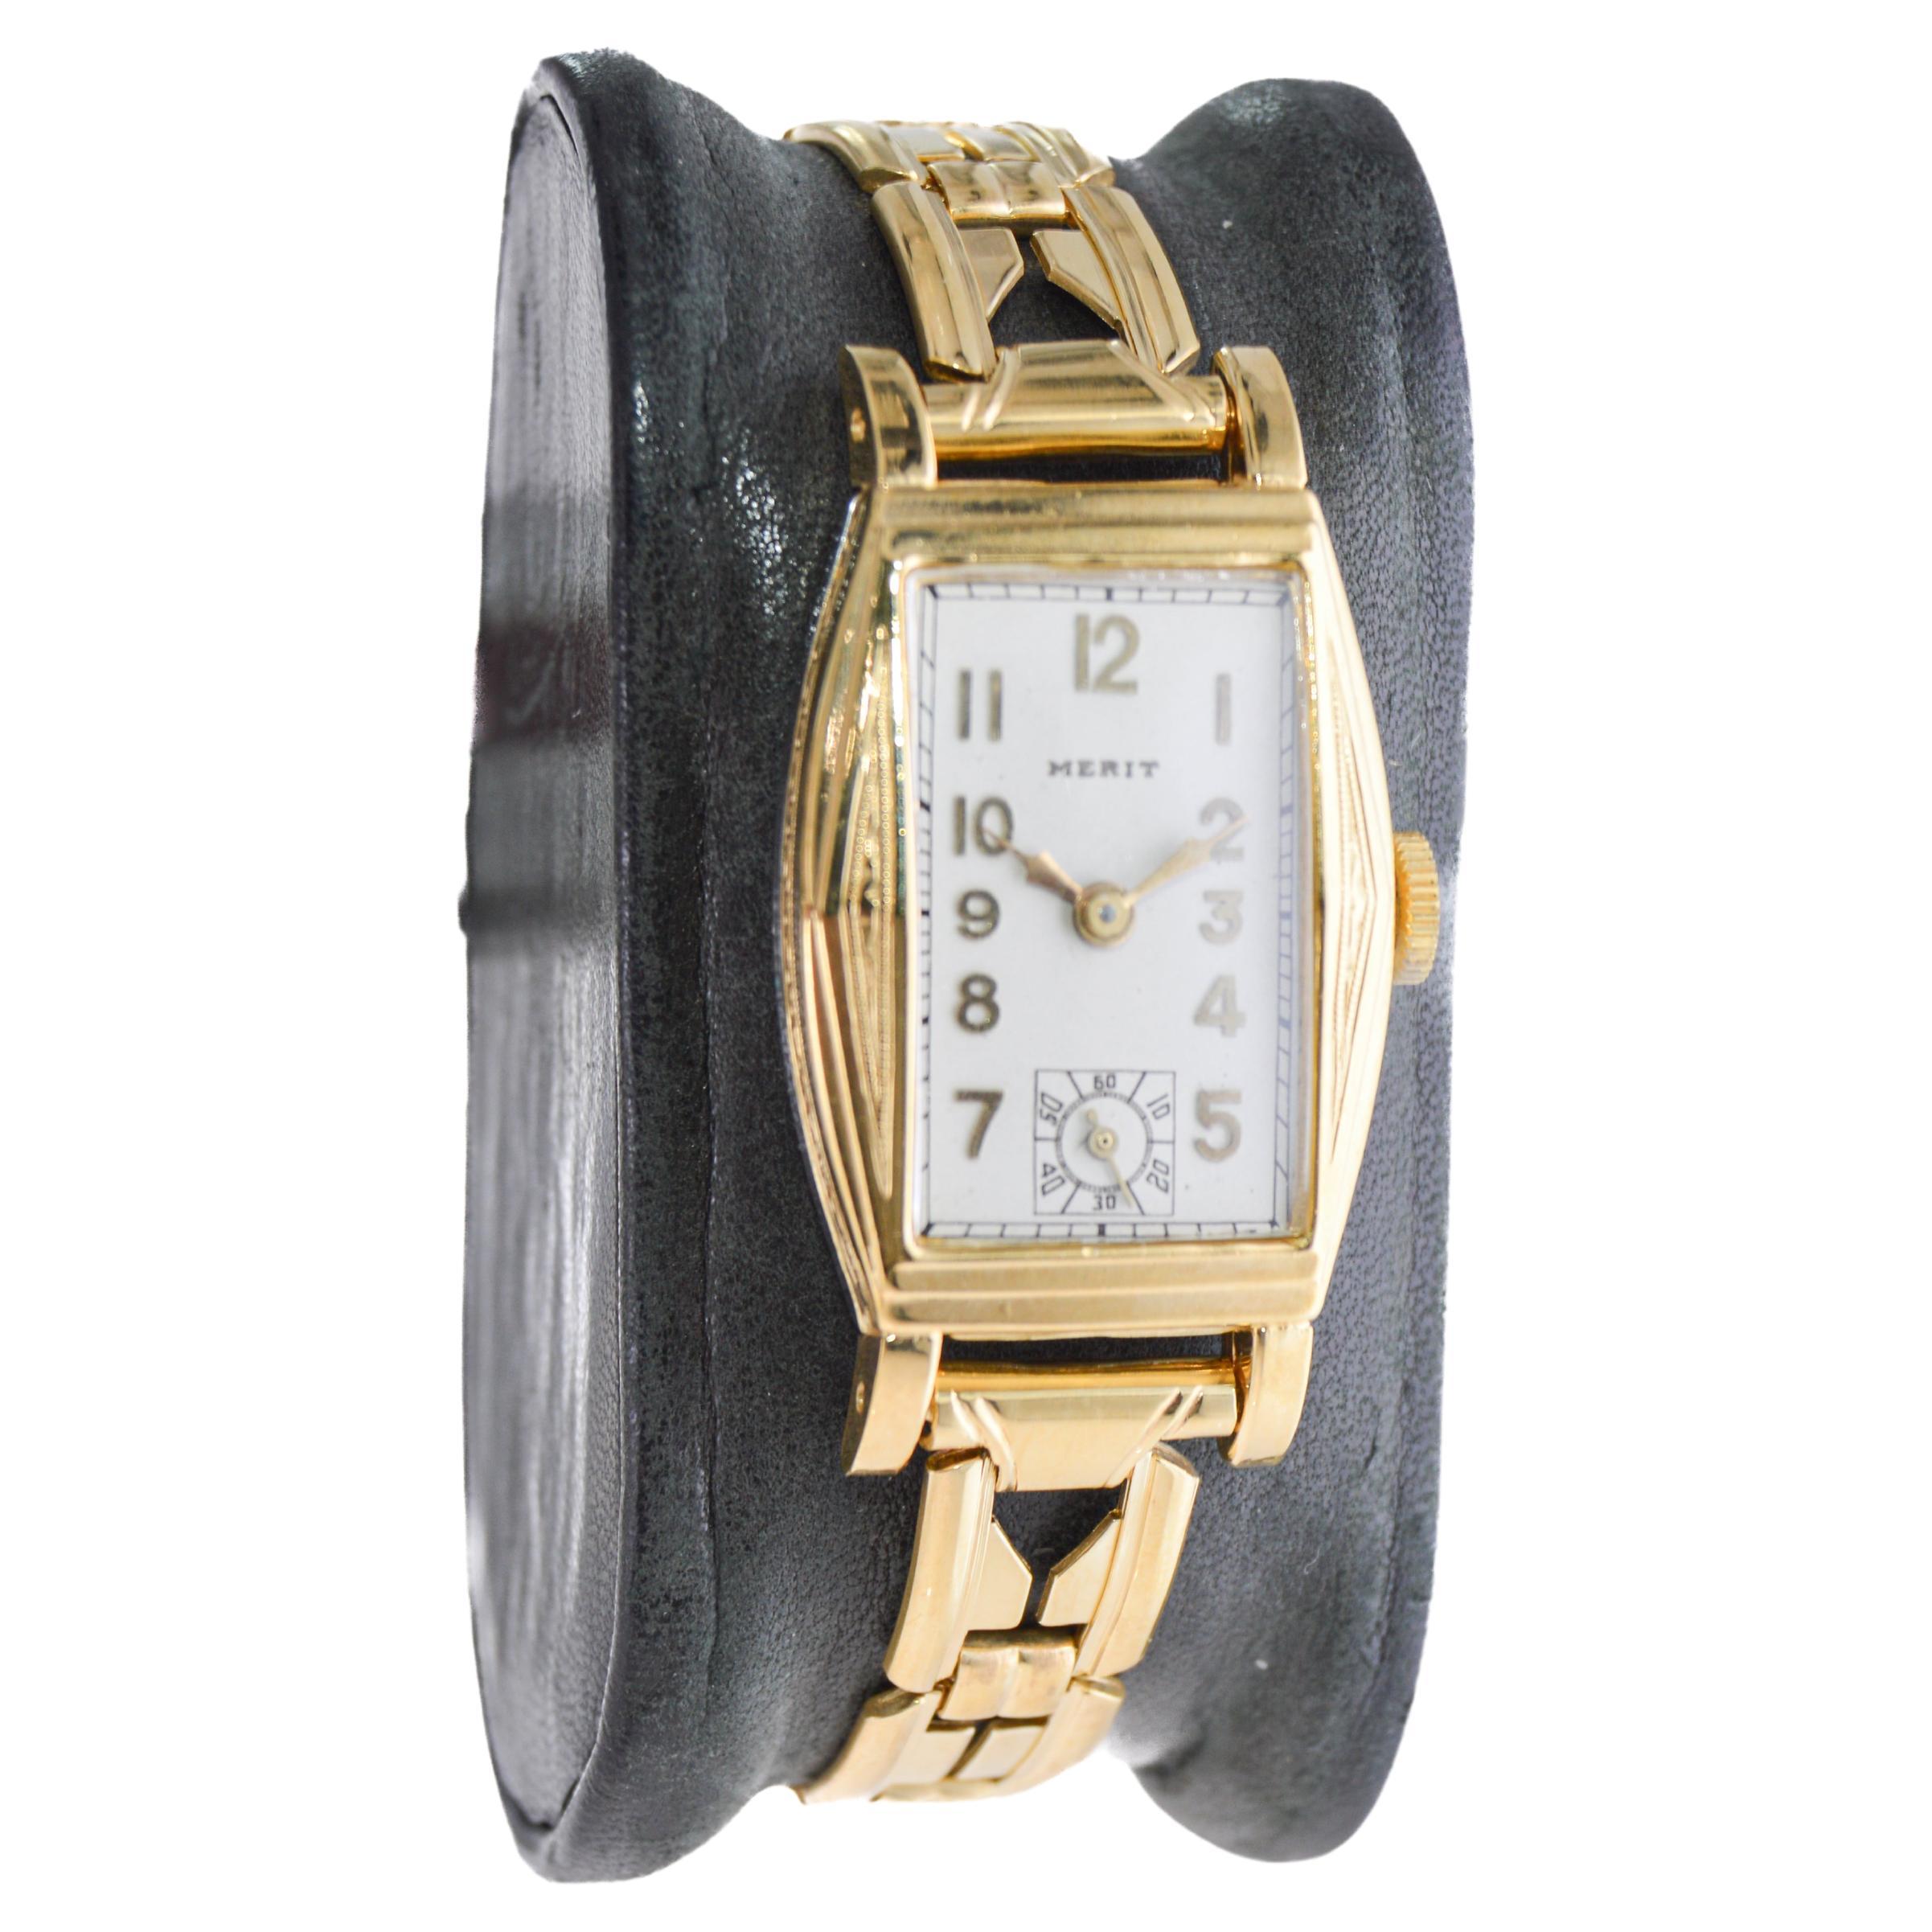 FACTORY / HOUSE: Merit Watch Company
STYLE / REFERENCE: Art Deco
METAL / MATERIAL: Gold-Filled
CIRCA / YEAR: 1940's
DIMENSIONS / SIZE: 40mm Length X 22mm Diameter
MOVEMENT / CALIBER: Manual Winding / 15 Jewels / Caliber Tonneau 
DIAL / HANDS: